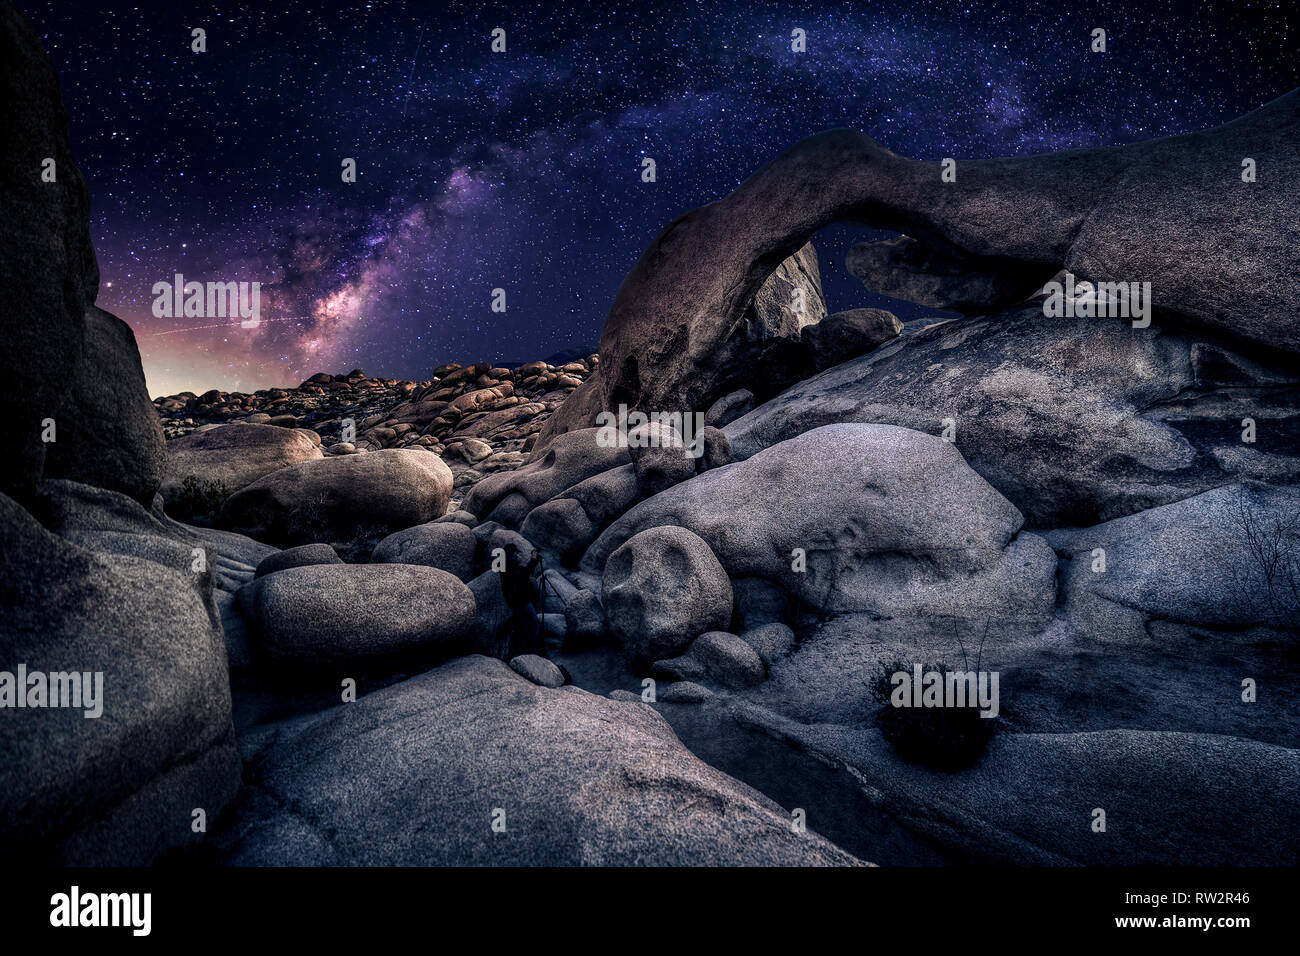 Photographer Doing Astro Photography In A Desert Nightscape With Milky Way Galaxy The Background Is Stary Celestial Bodies In Astronomy The Heaven Stock Photo Alamy